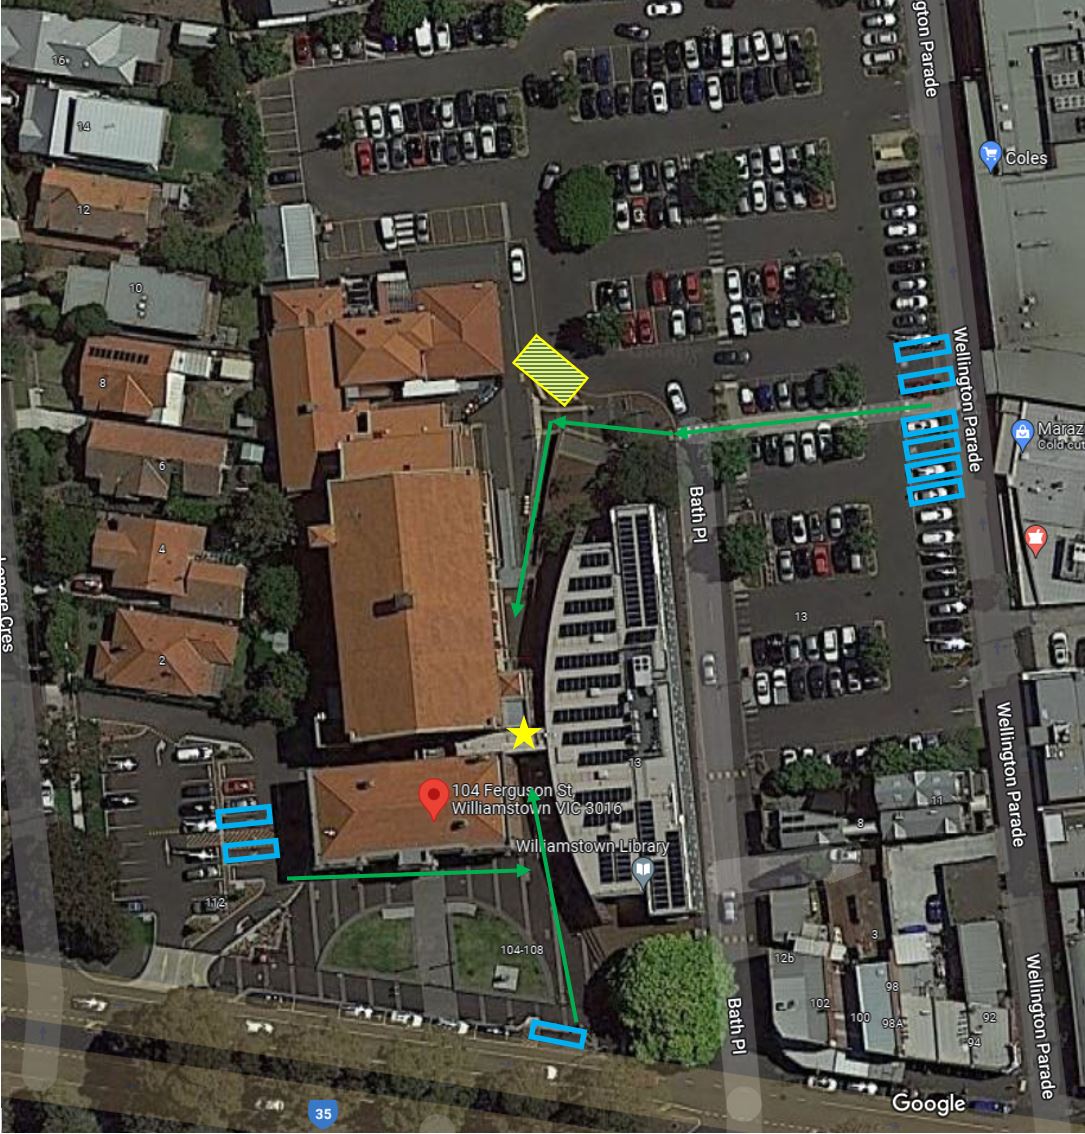 Wide aerial photograph of Williamstown Town Hall depicting accessible car parking spaces in blue, green arrows for accessible pathway in green arrows, yellow and blue cross hatch for drop off point and a yellow star for the accessible entrance